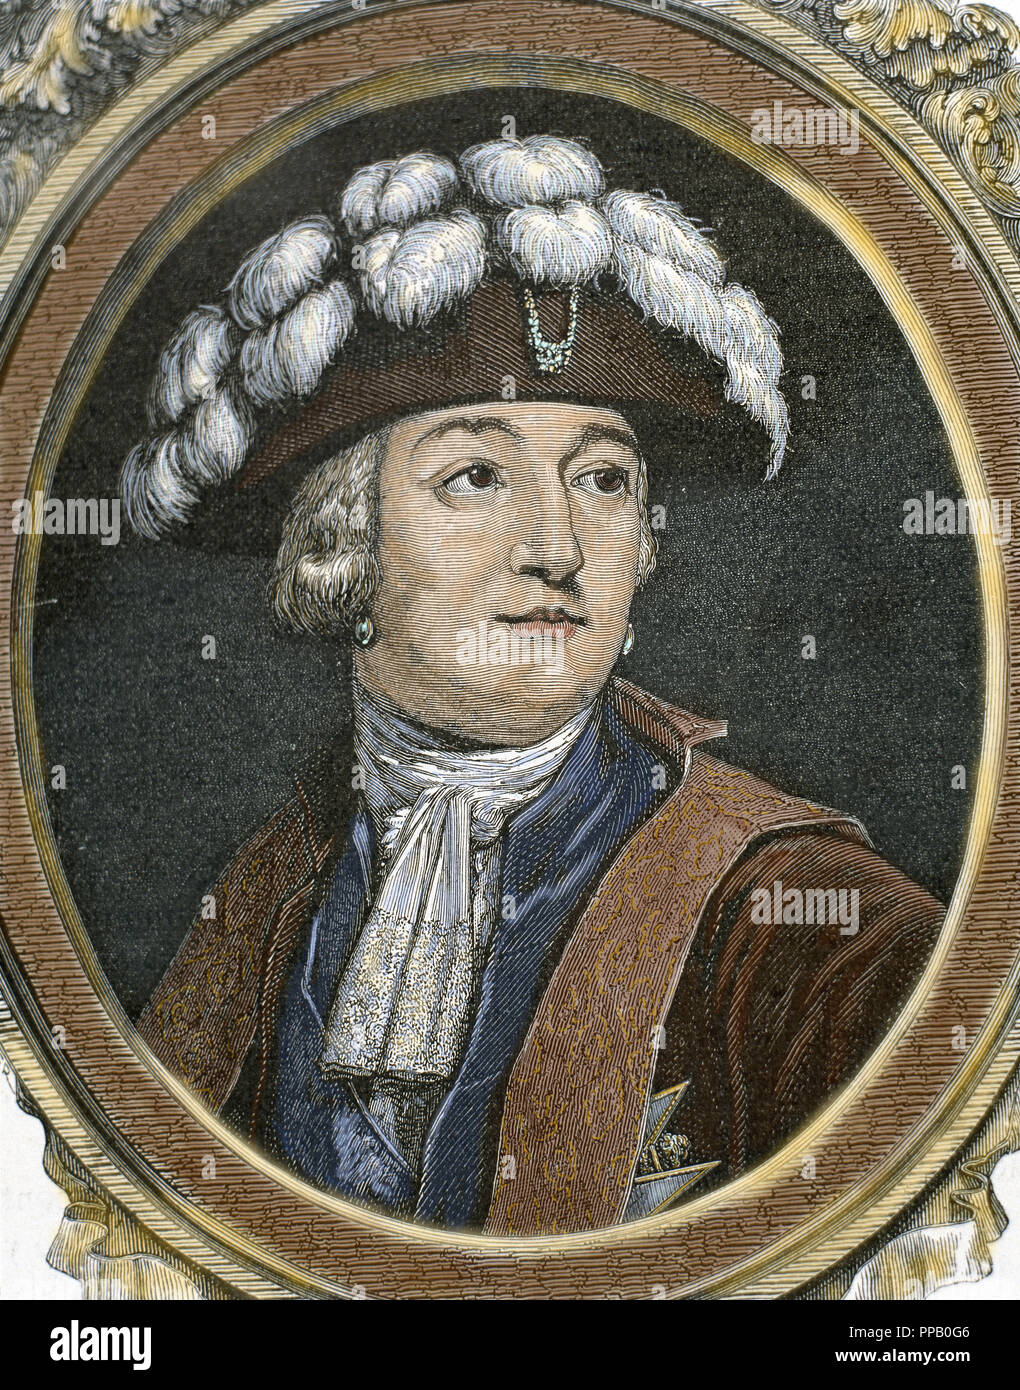 ORLEANS, Louis Philippe Joseph, Duke of Montpensier and Orleans (1747-1793), called Philippe Egalite since 1792. French Prince, grandson of the Regent Philippe d'Orleans. Nineteenth-century engraving. Stock Photo